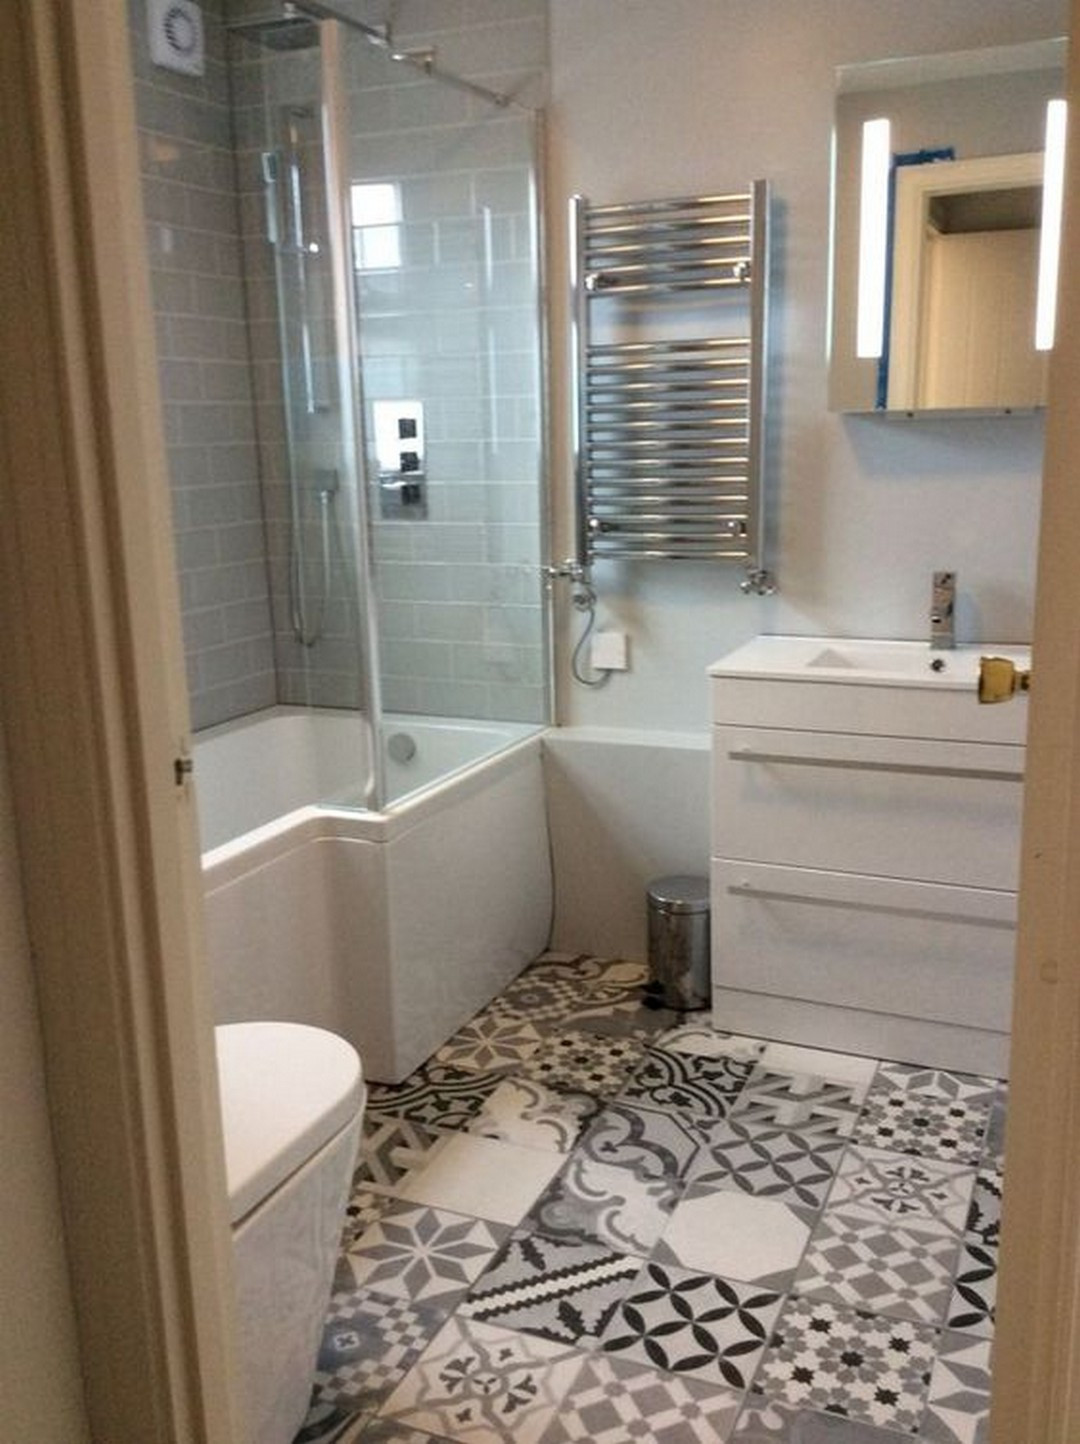 Tile Designs For Bathrooms
 Style up your Ordinary Bathroom with These Spanish Tile